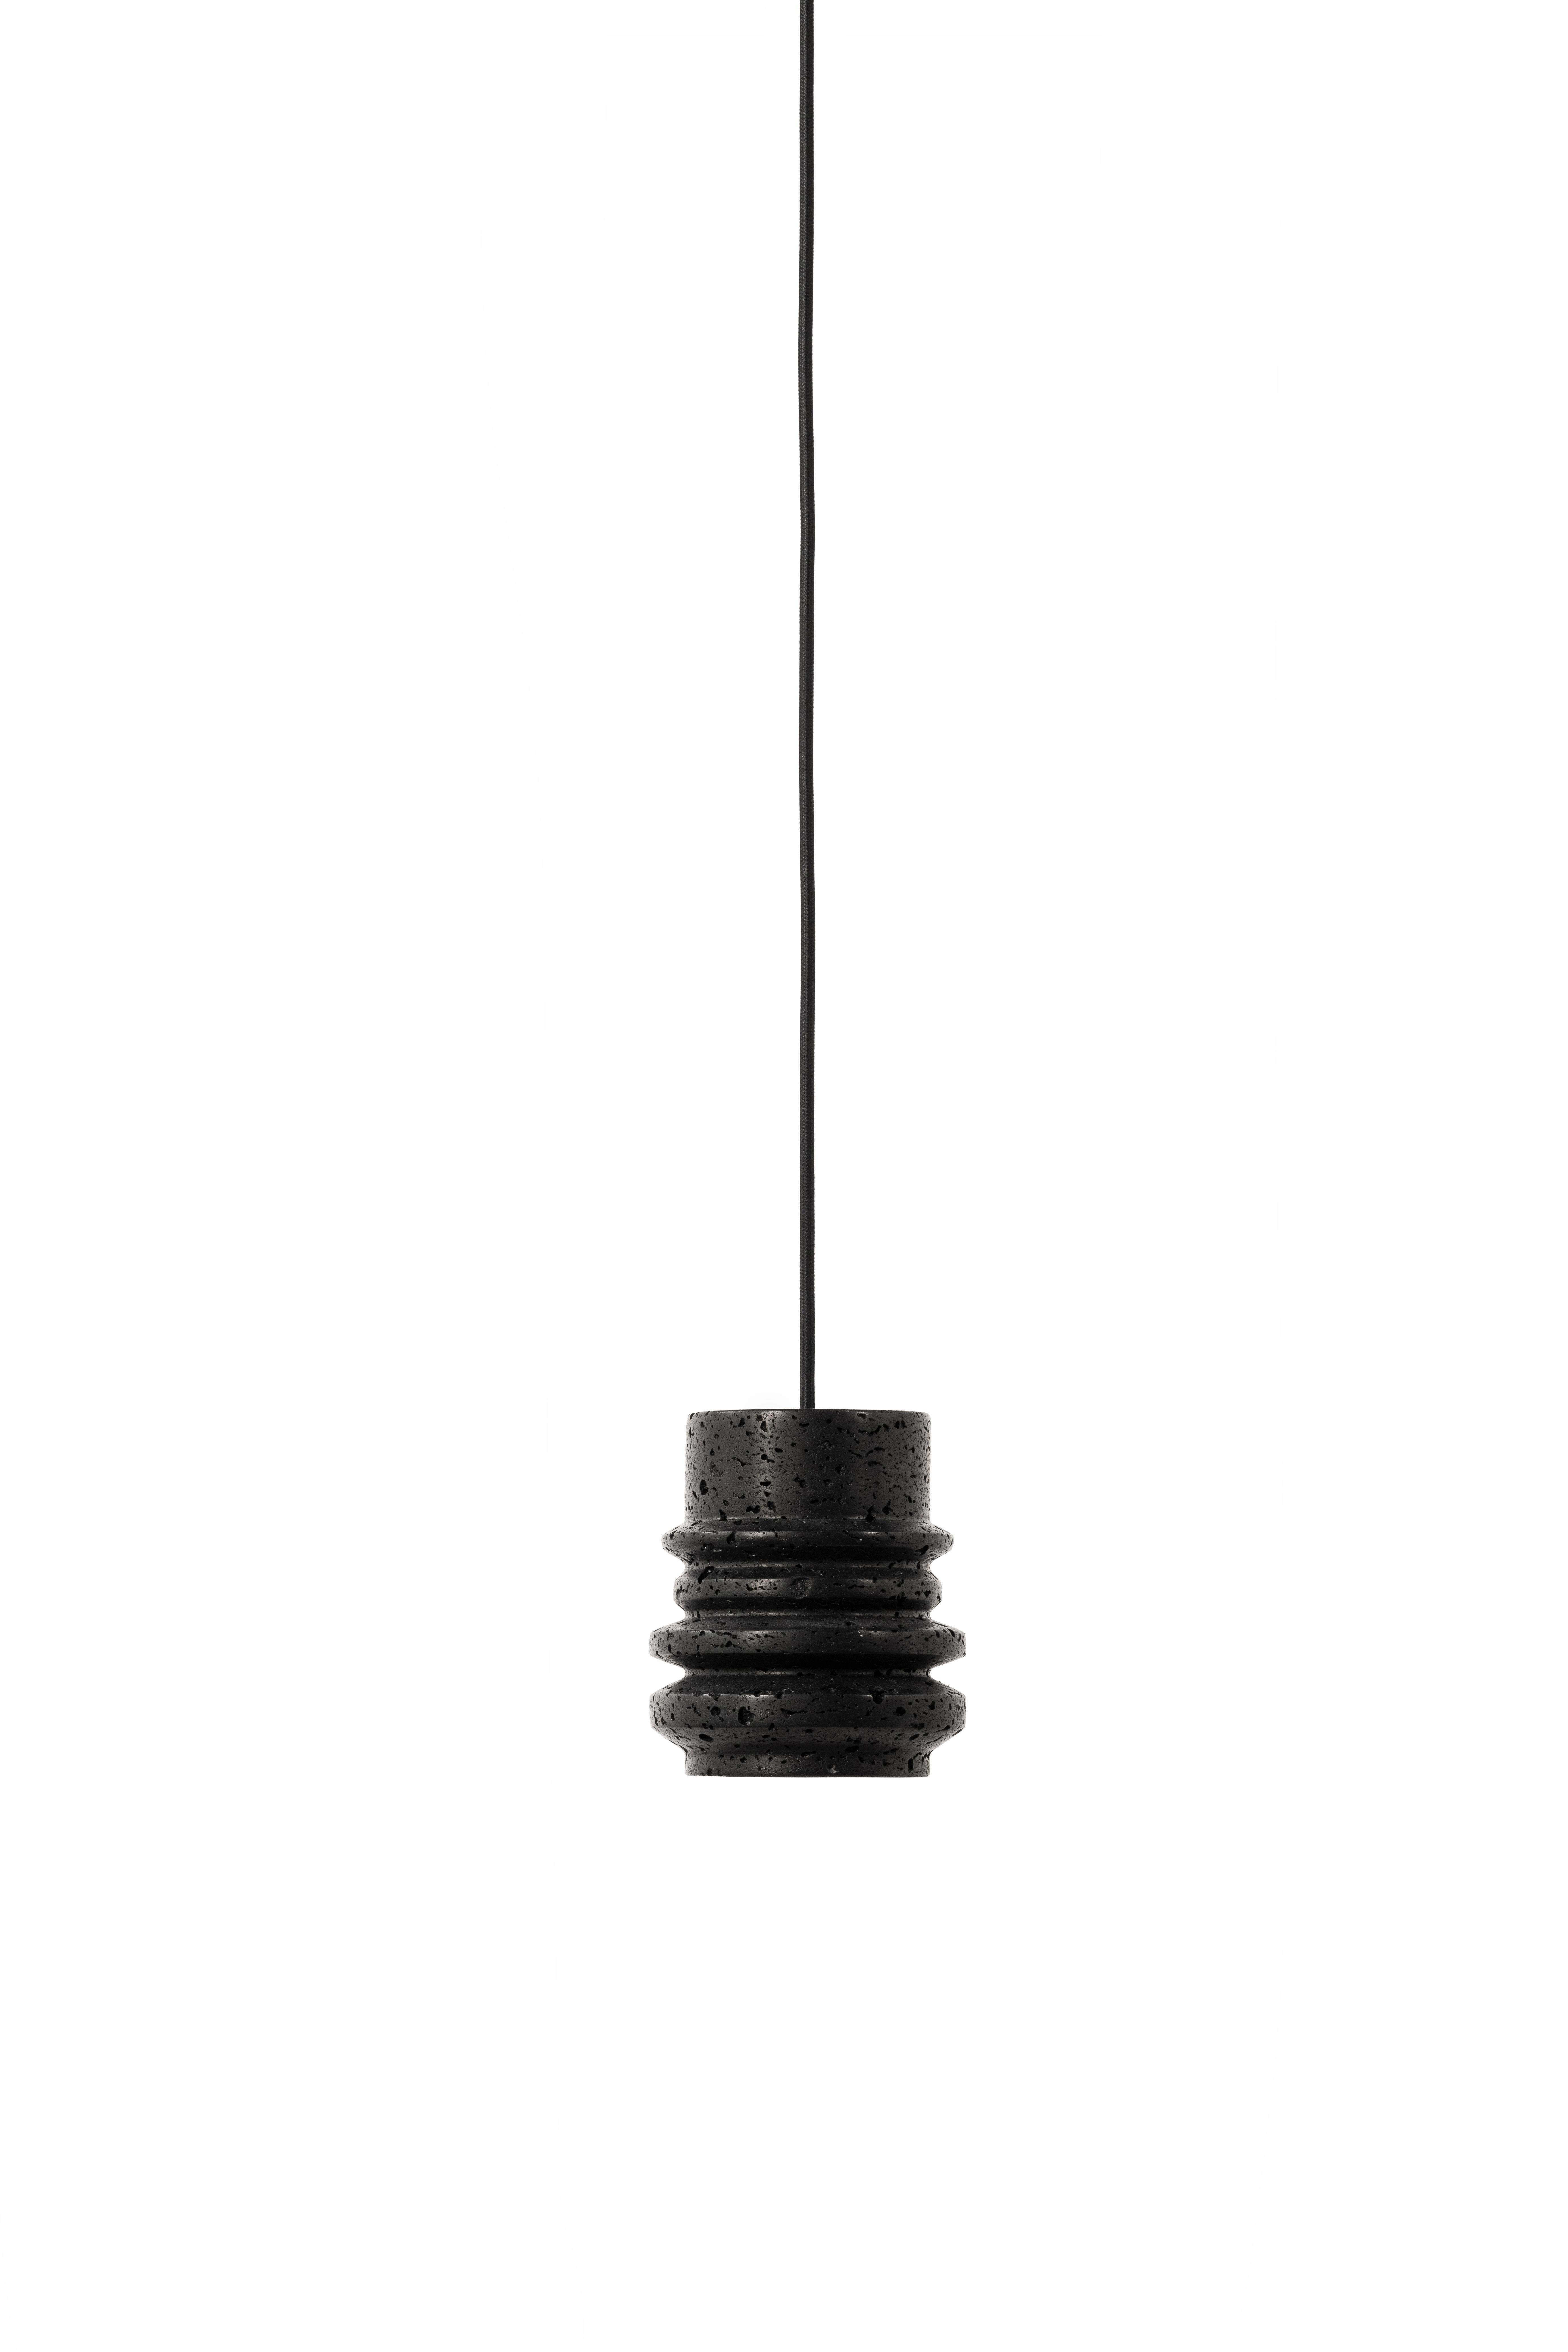 Pendant lamp 'CIRCLE' by Buzao x Bentu design.
Black lava stone

Size: 15 cm high, 13 cm diameter
Wire: 2 meters black (adjustable)
Lamp type: E27 LED 3W 100-240V 80Ra 200LM 2700K - Comptable with US electric system.
Ceiling rose: 6.5cm diameter